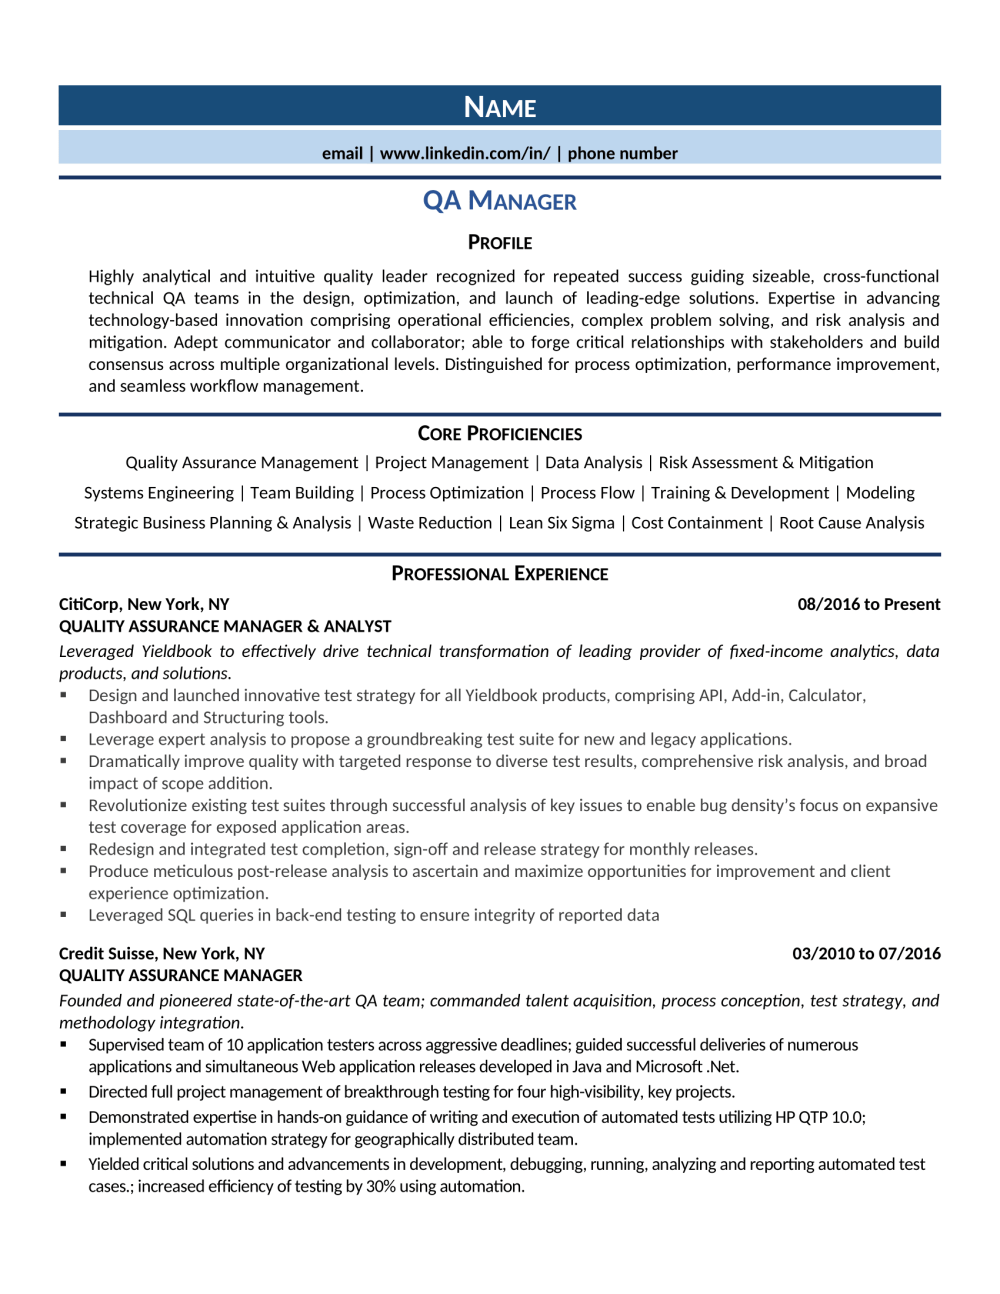 QA Manager Resume Template 0001